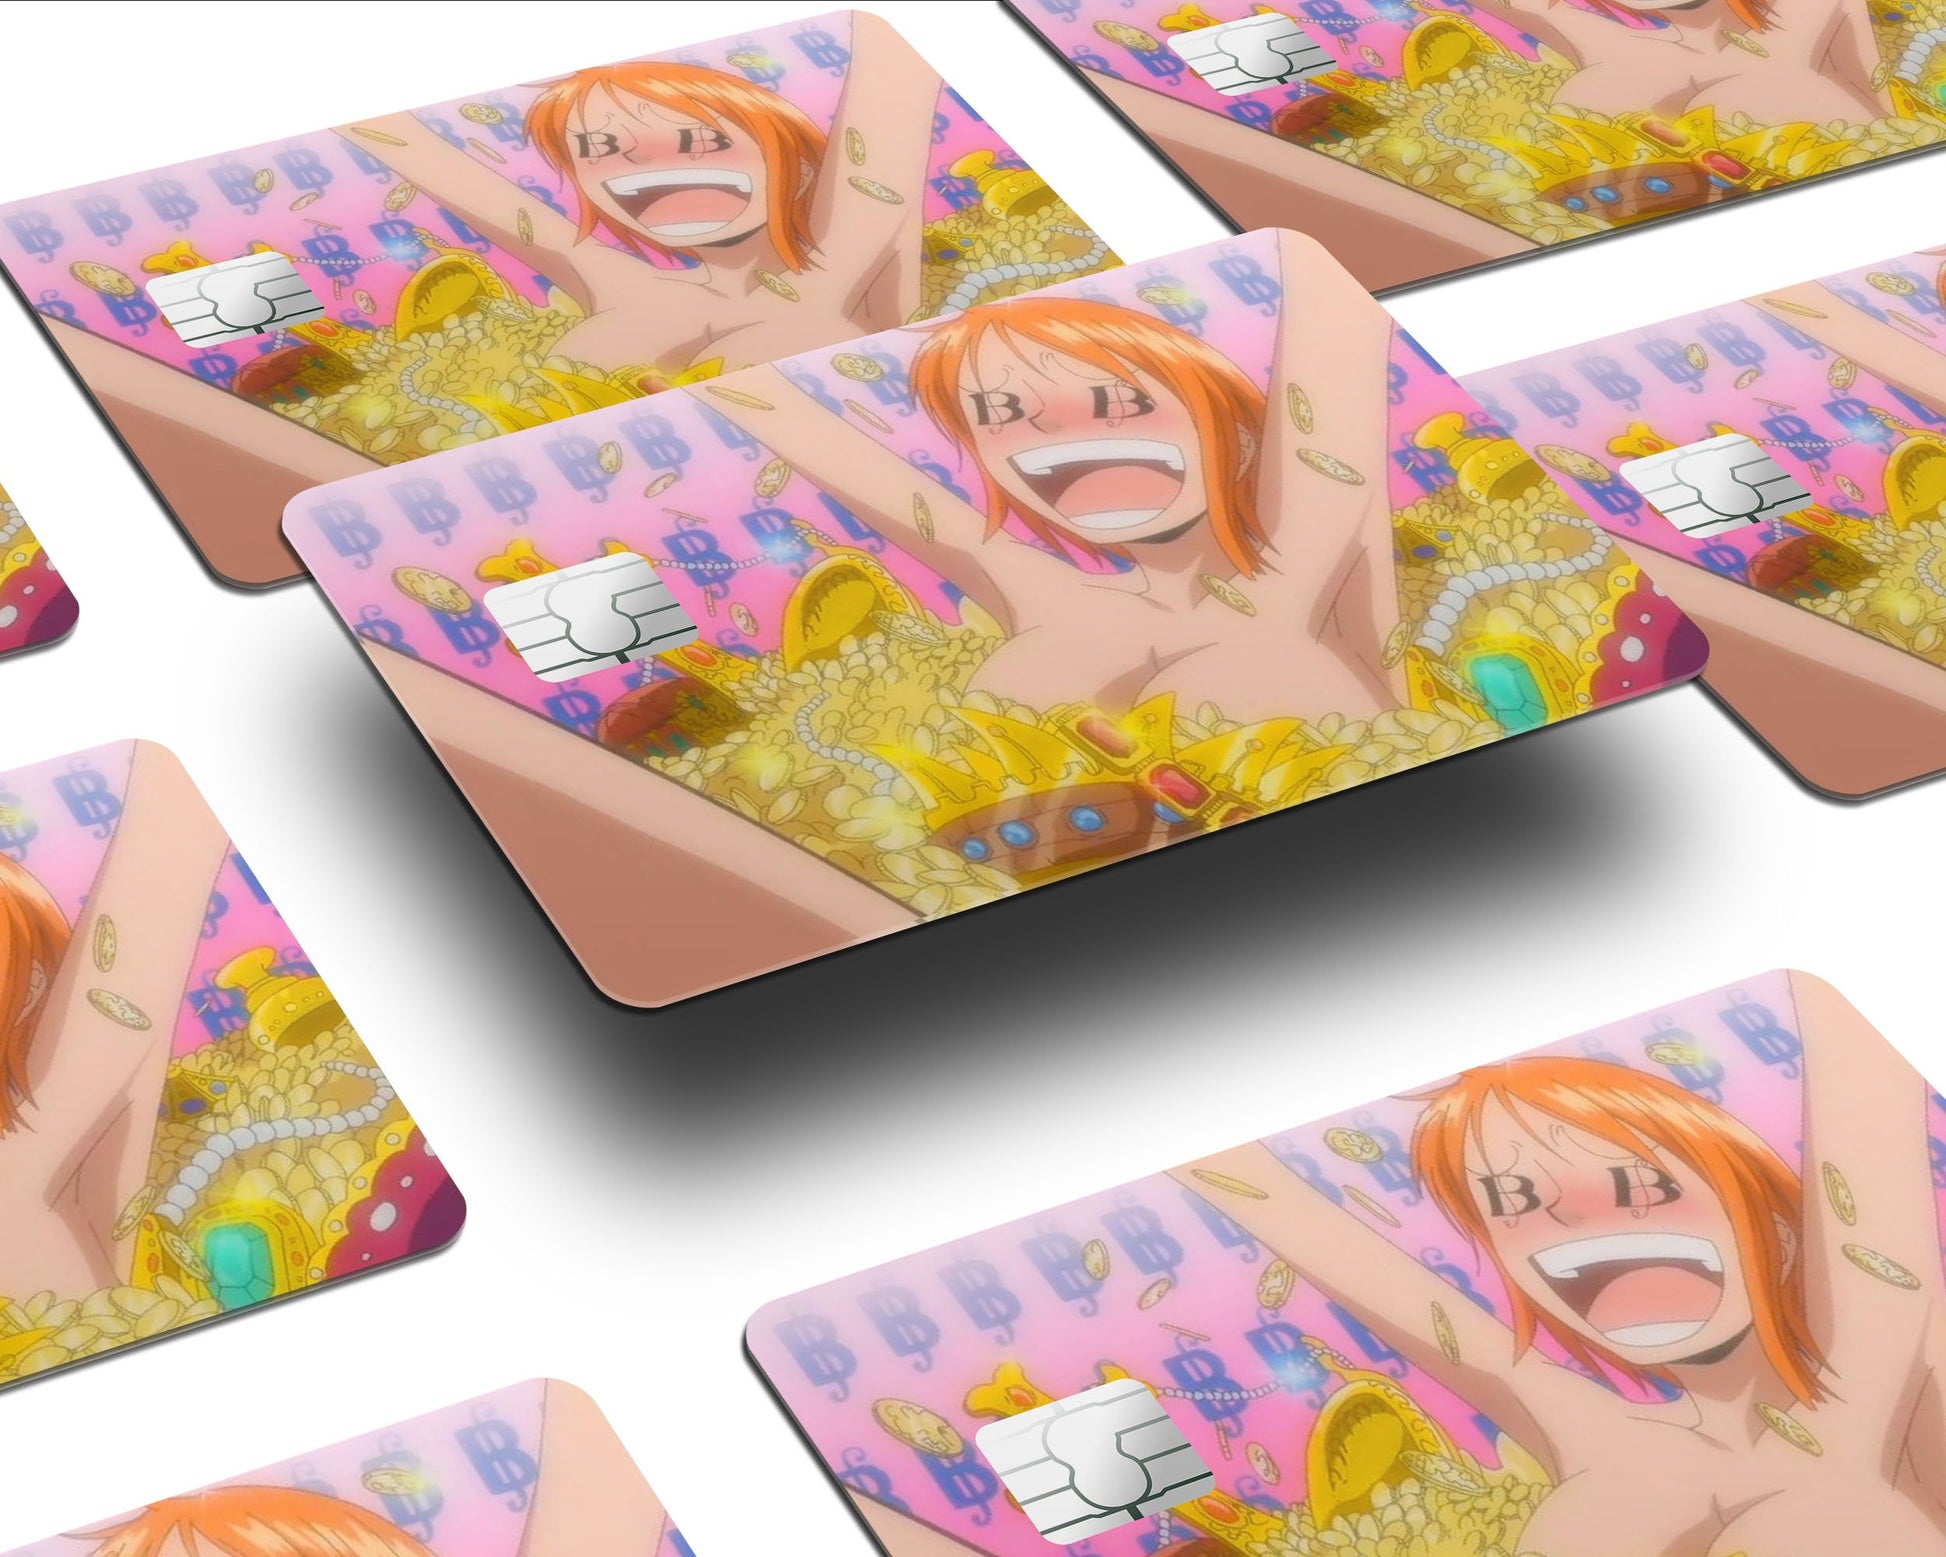 Anime Town Creations Credit Card Nami the Rich Hoe Full Skins - Anime One Piece Skin